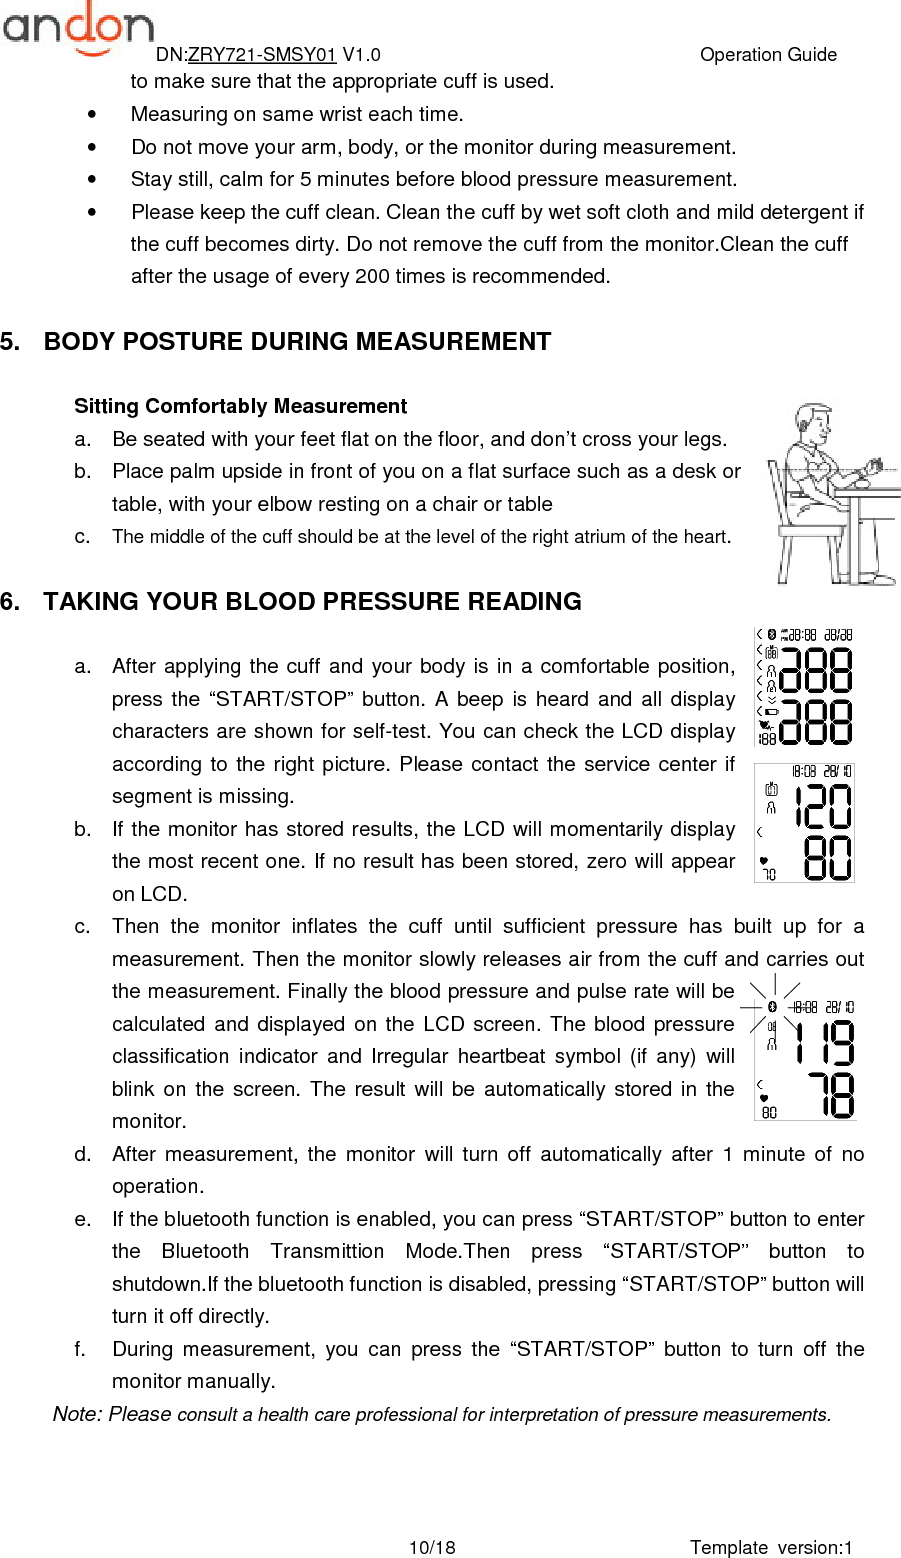 DN:ZRY721-SMSY01 V1.0                                                                    Operation Guide Template  version:1 10/18to make sure that the appropriate cuff is used. •  Measuring on same wrist each time. •  Do not move your arm, body, or the monitor during measurement. •  Stay still, calm for 5 minutes before blood pressure measurement. •  Please keep the cuff clean. Clean the cuff by wet soft cloth and mild detergent if the cuff becomes dirty. Do not remove the cuff from the monitor.Clean the cuff after the usage of every 200 times is recommended.  5.  BODY POSTURE DURING MEASUREMENT  Sitting Comfortably Measurement   a.  Be seated with your feet flat on the floor, and don’t cross your legs.     b.  Place palm upside in front of you on a flat surface such as a desk or table, with your elbow resting on a chair or table c.  The middle of the cuff should be at the level of the right atrium of the heart.  6.  TAKING YOUR BLOOD PRESSURE READING  a.  After applying the cuff and  your  body is  in  a comfortable position, press  the  “START/STOP”  button.  A  beep  is  heard  and  all  display characters are shown for self-test. You can check the LCD display according  to  the  right  picture. Please  contact  the  service  center  if segment is missing. b.  If the monitor has  stored results, the LCD will momentarily display the most recent one. If no result has been stored, zero will appear on LCD. c.  Then  the  monitor  inflates  the  cuff  until  sufficient  pressure  has  built  up  for  a measurement. Then the monitor slowly releases air from the cuff and carries out the measurement. Finally the blood pressure and pulse rate will be calculated  and  displayed  on  the  LCD  screen.  The  blood  pressure classification  indicator  and  Irregular  heartbeat  symbol  (if  any)  will blink  on  the  screen.  The  result  will  be  automatically  stored  in  the monitor. d.  After  measurement,  the  monitor  will  turn  off  automatically  after  1  minute  of  no operation. e.  If the bluetooth function is enabled, you can press “START/STOP” button to enter the  Bluetooth  Transmittion  Mode.Then  press  “START/STOP”  button  to shutdown.If the bluetooth function is disabled, pressing “START/STOP” button will turn it off directly. f.  During  measurement,  you  can  press  the  “START/STOP”  button  to  turn  off  the monitor manually. Note: Please consult a health care professional for interpretation of pressure measurements.  